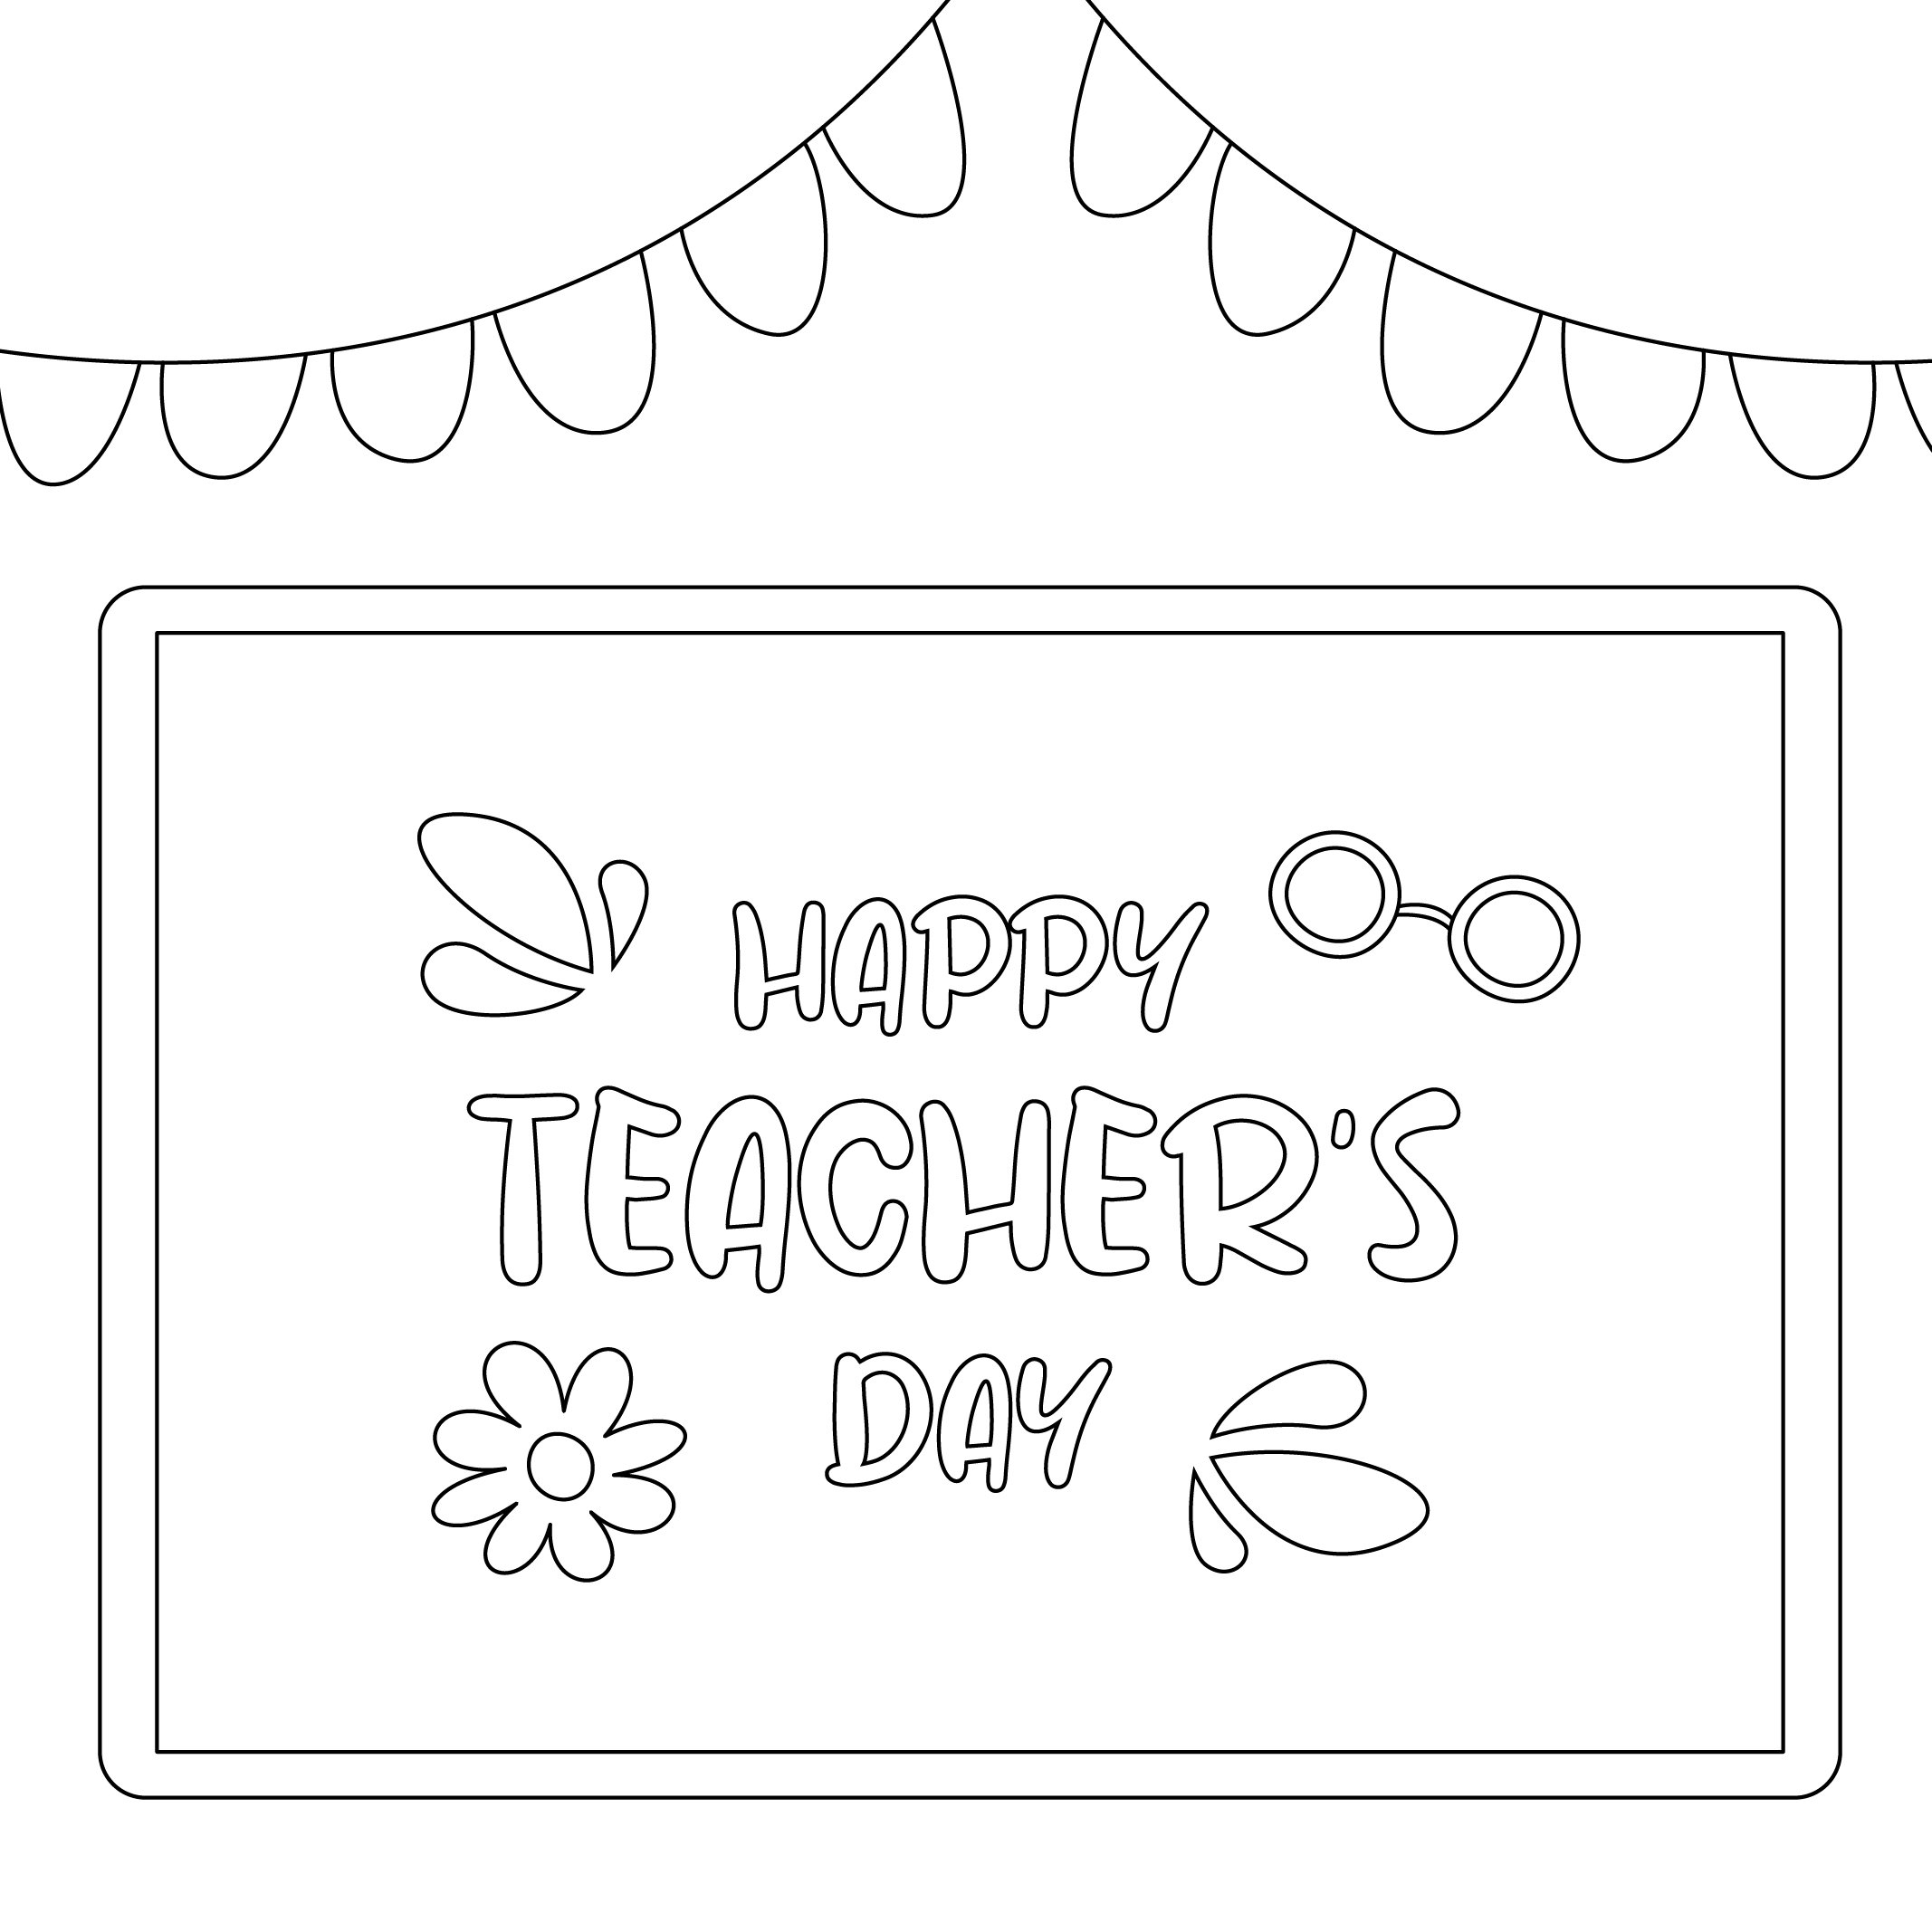 free-happy-teachers-day-drawing-download-in-illustrator-psd-eps